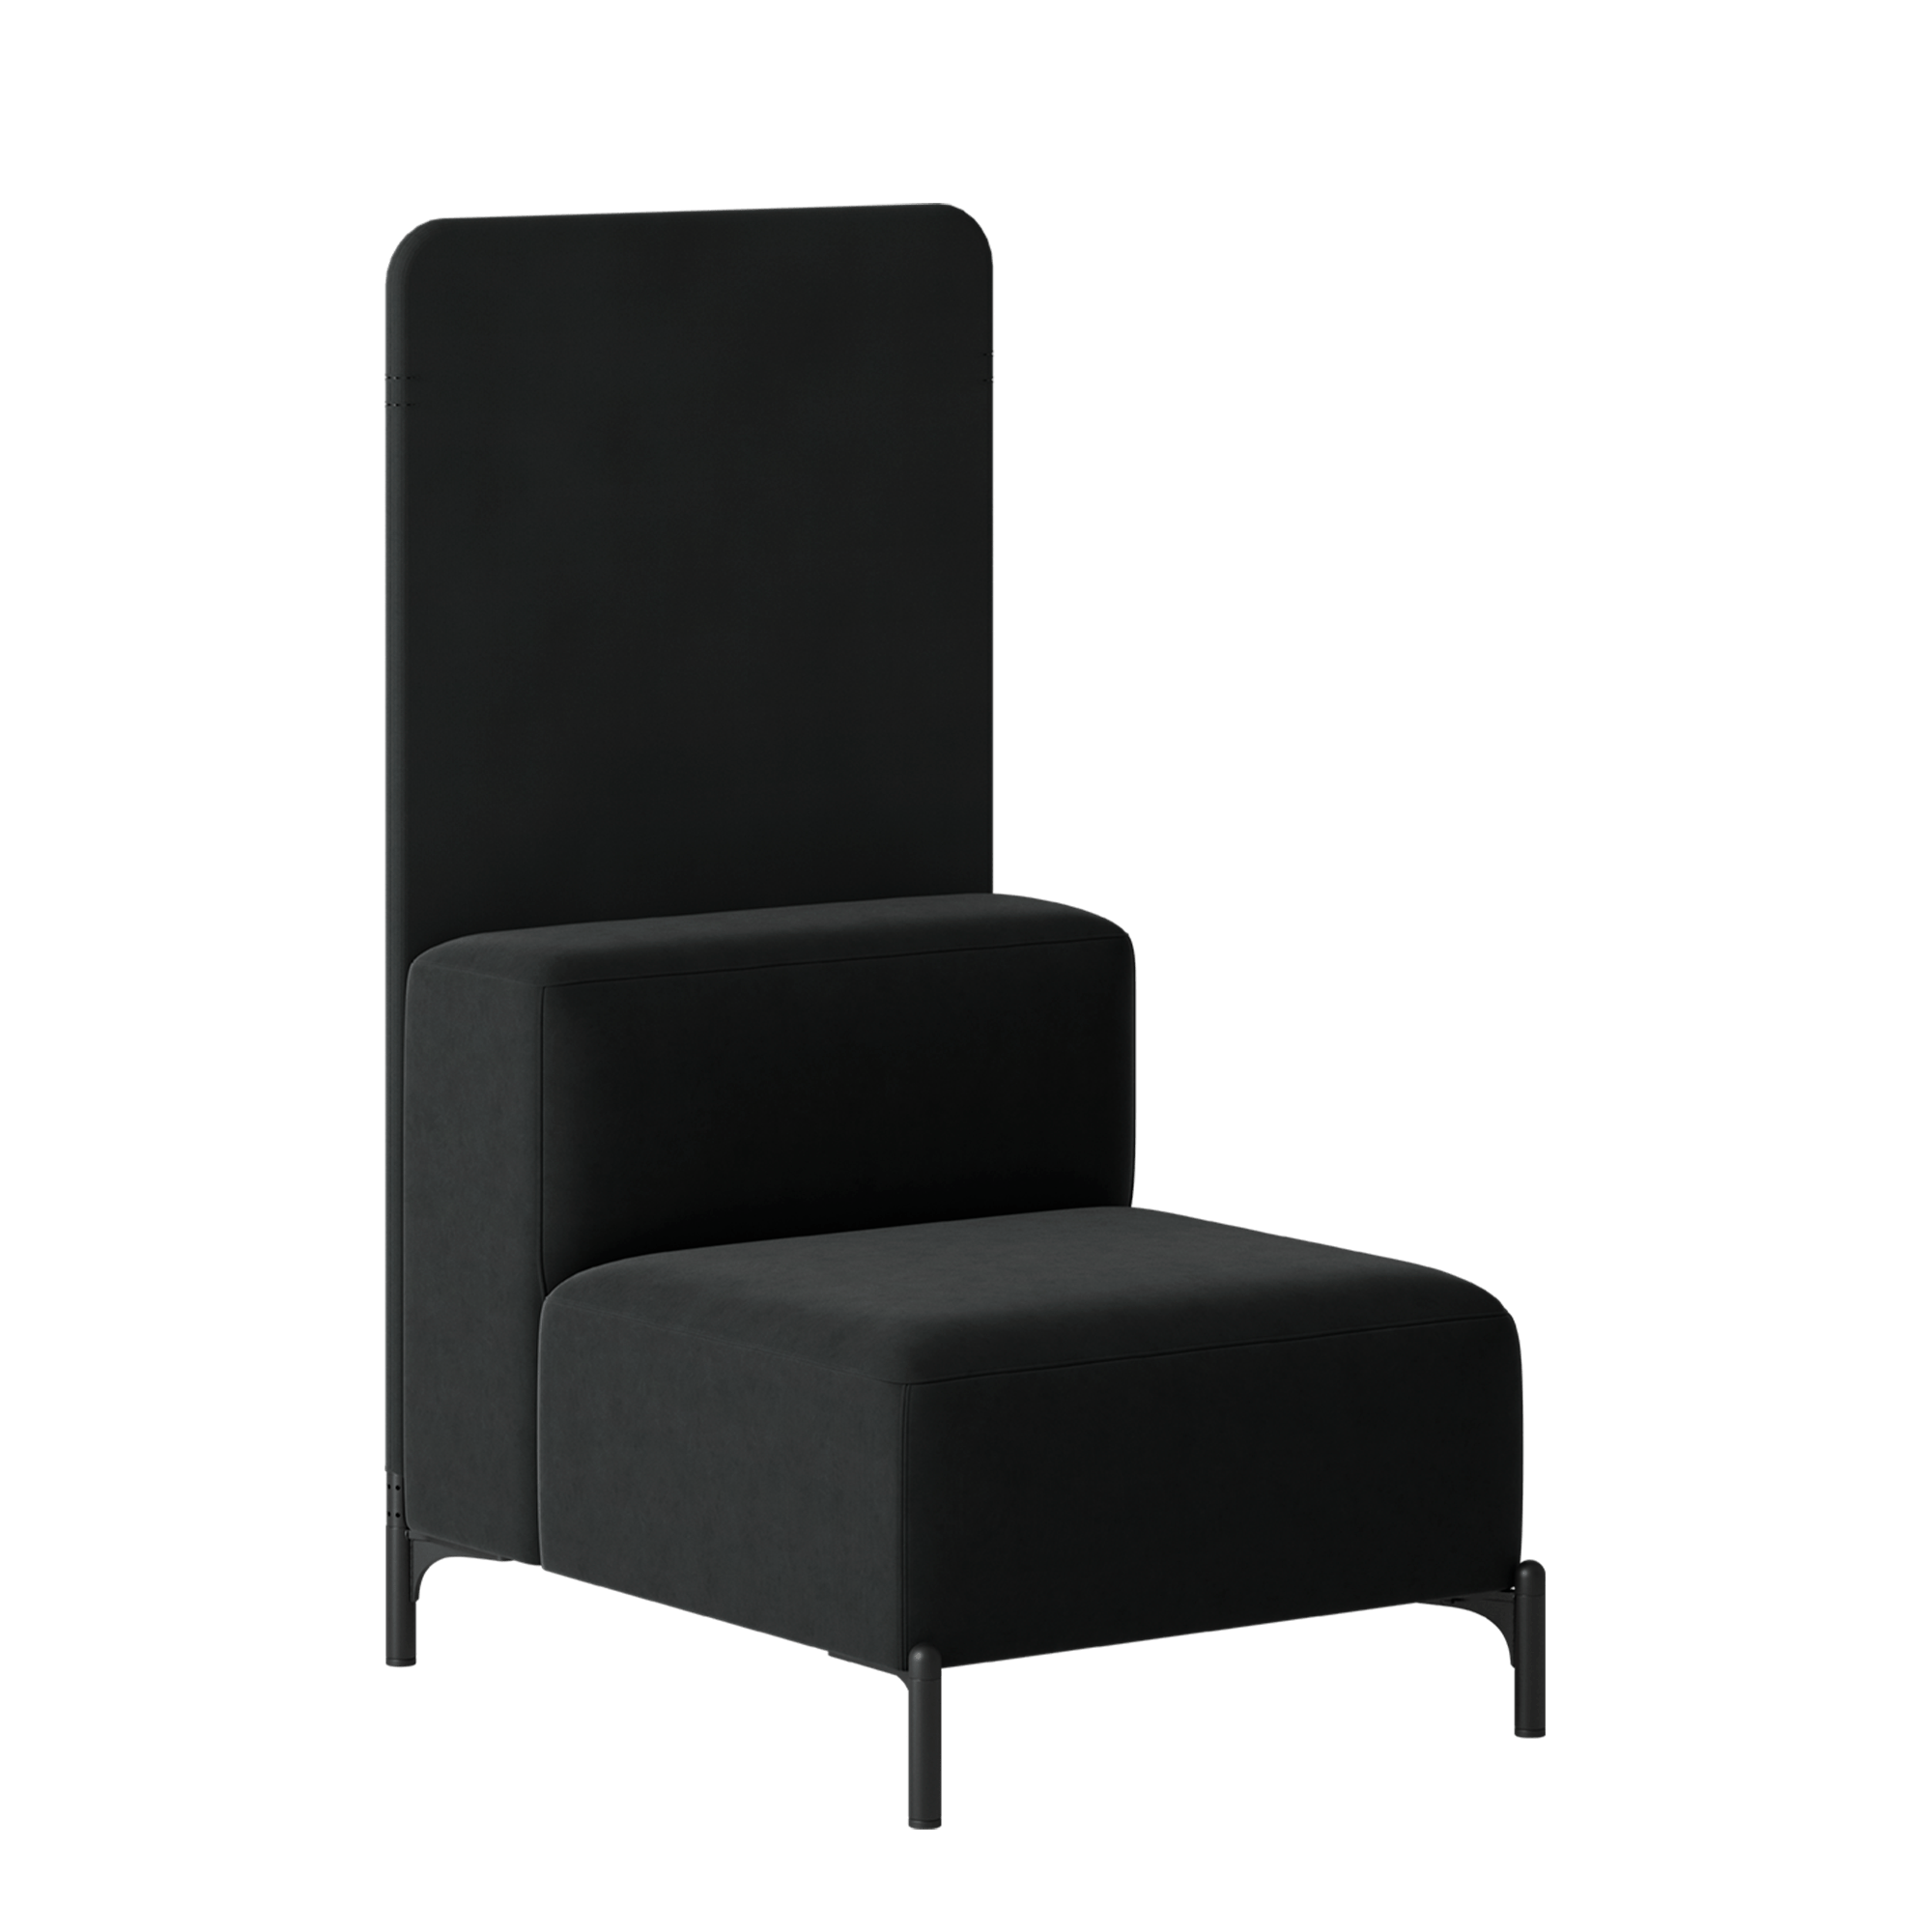 A black chair with a black seat and back.